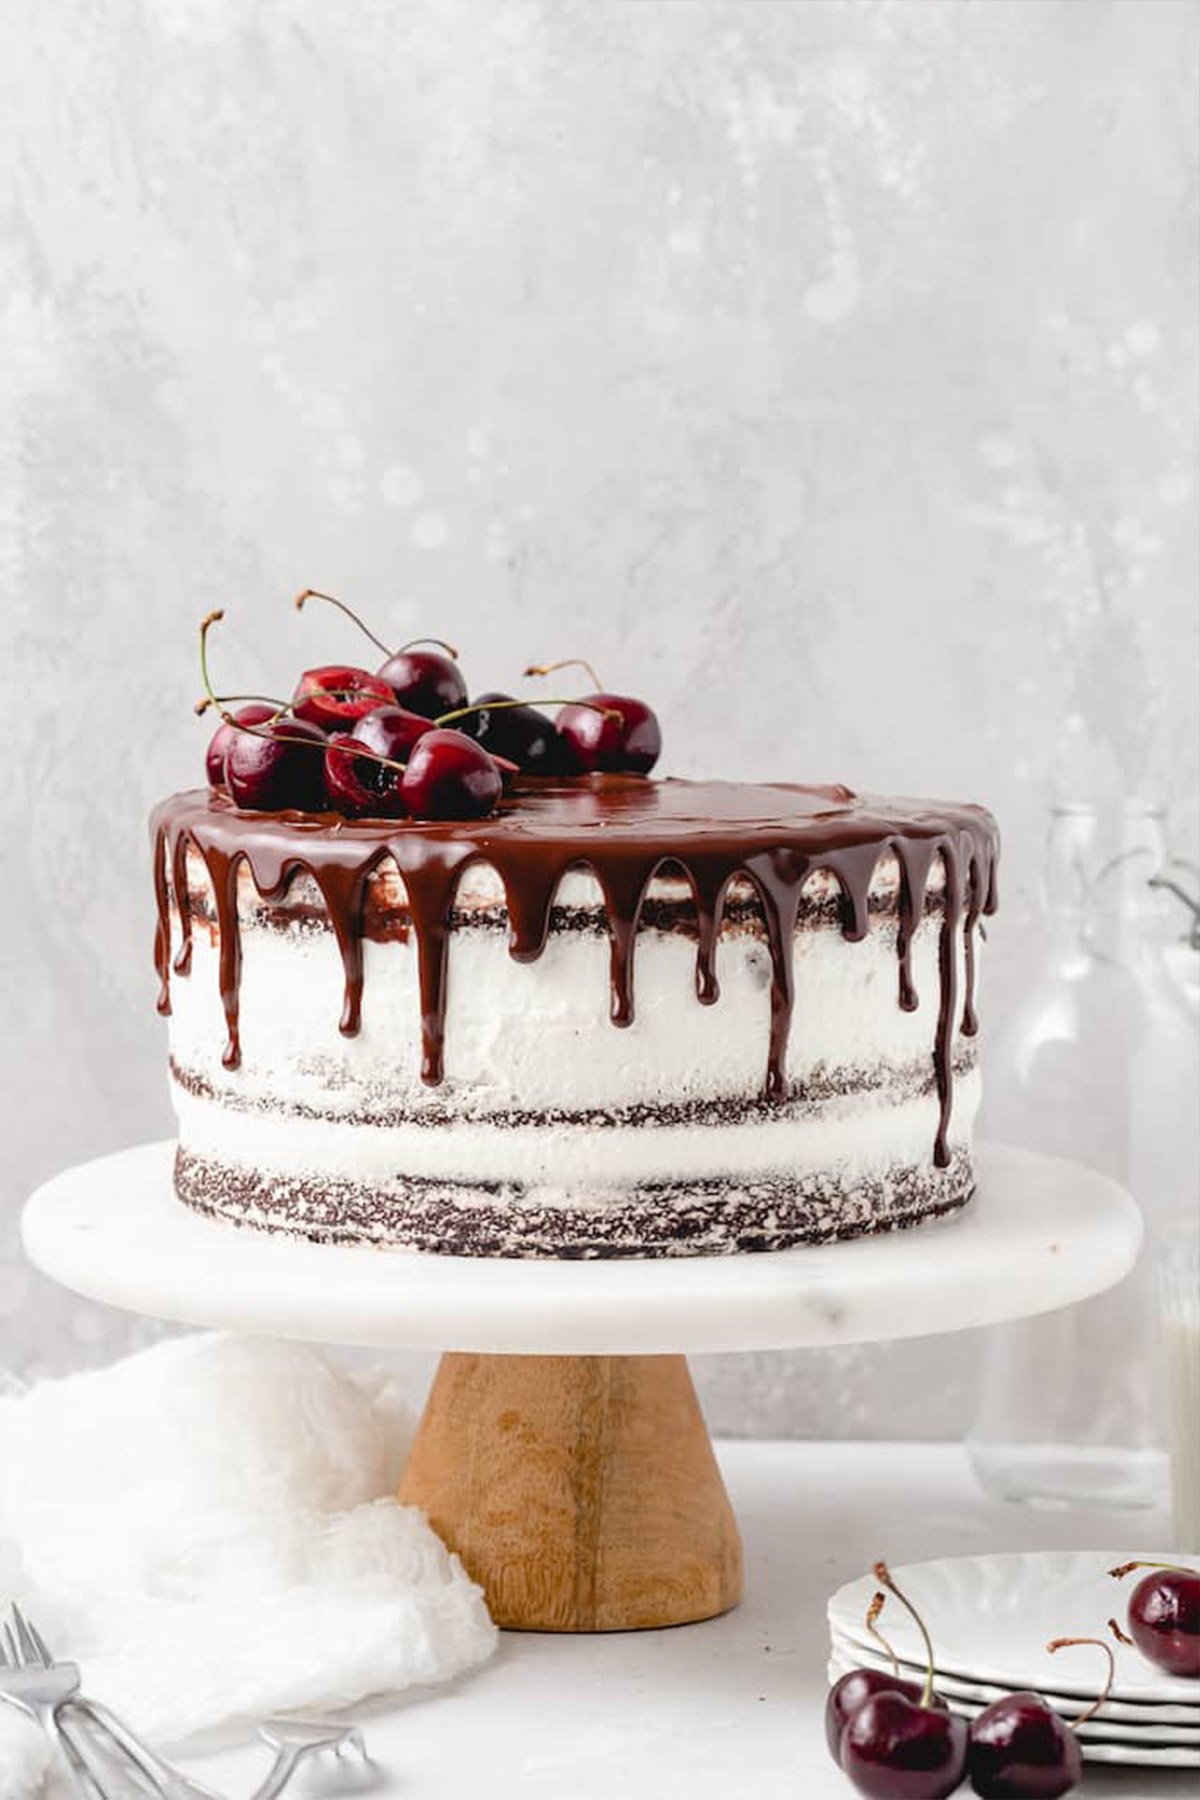 A black forest cake on a white cake stand with cherries on top against gray background.